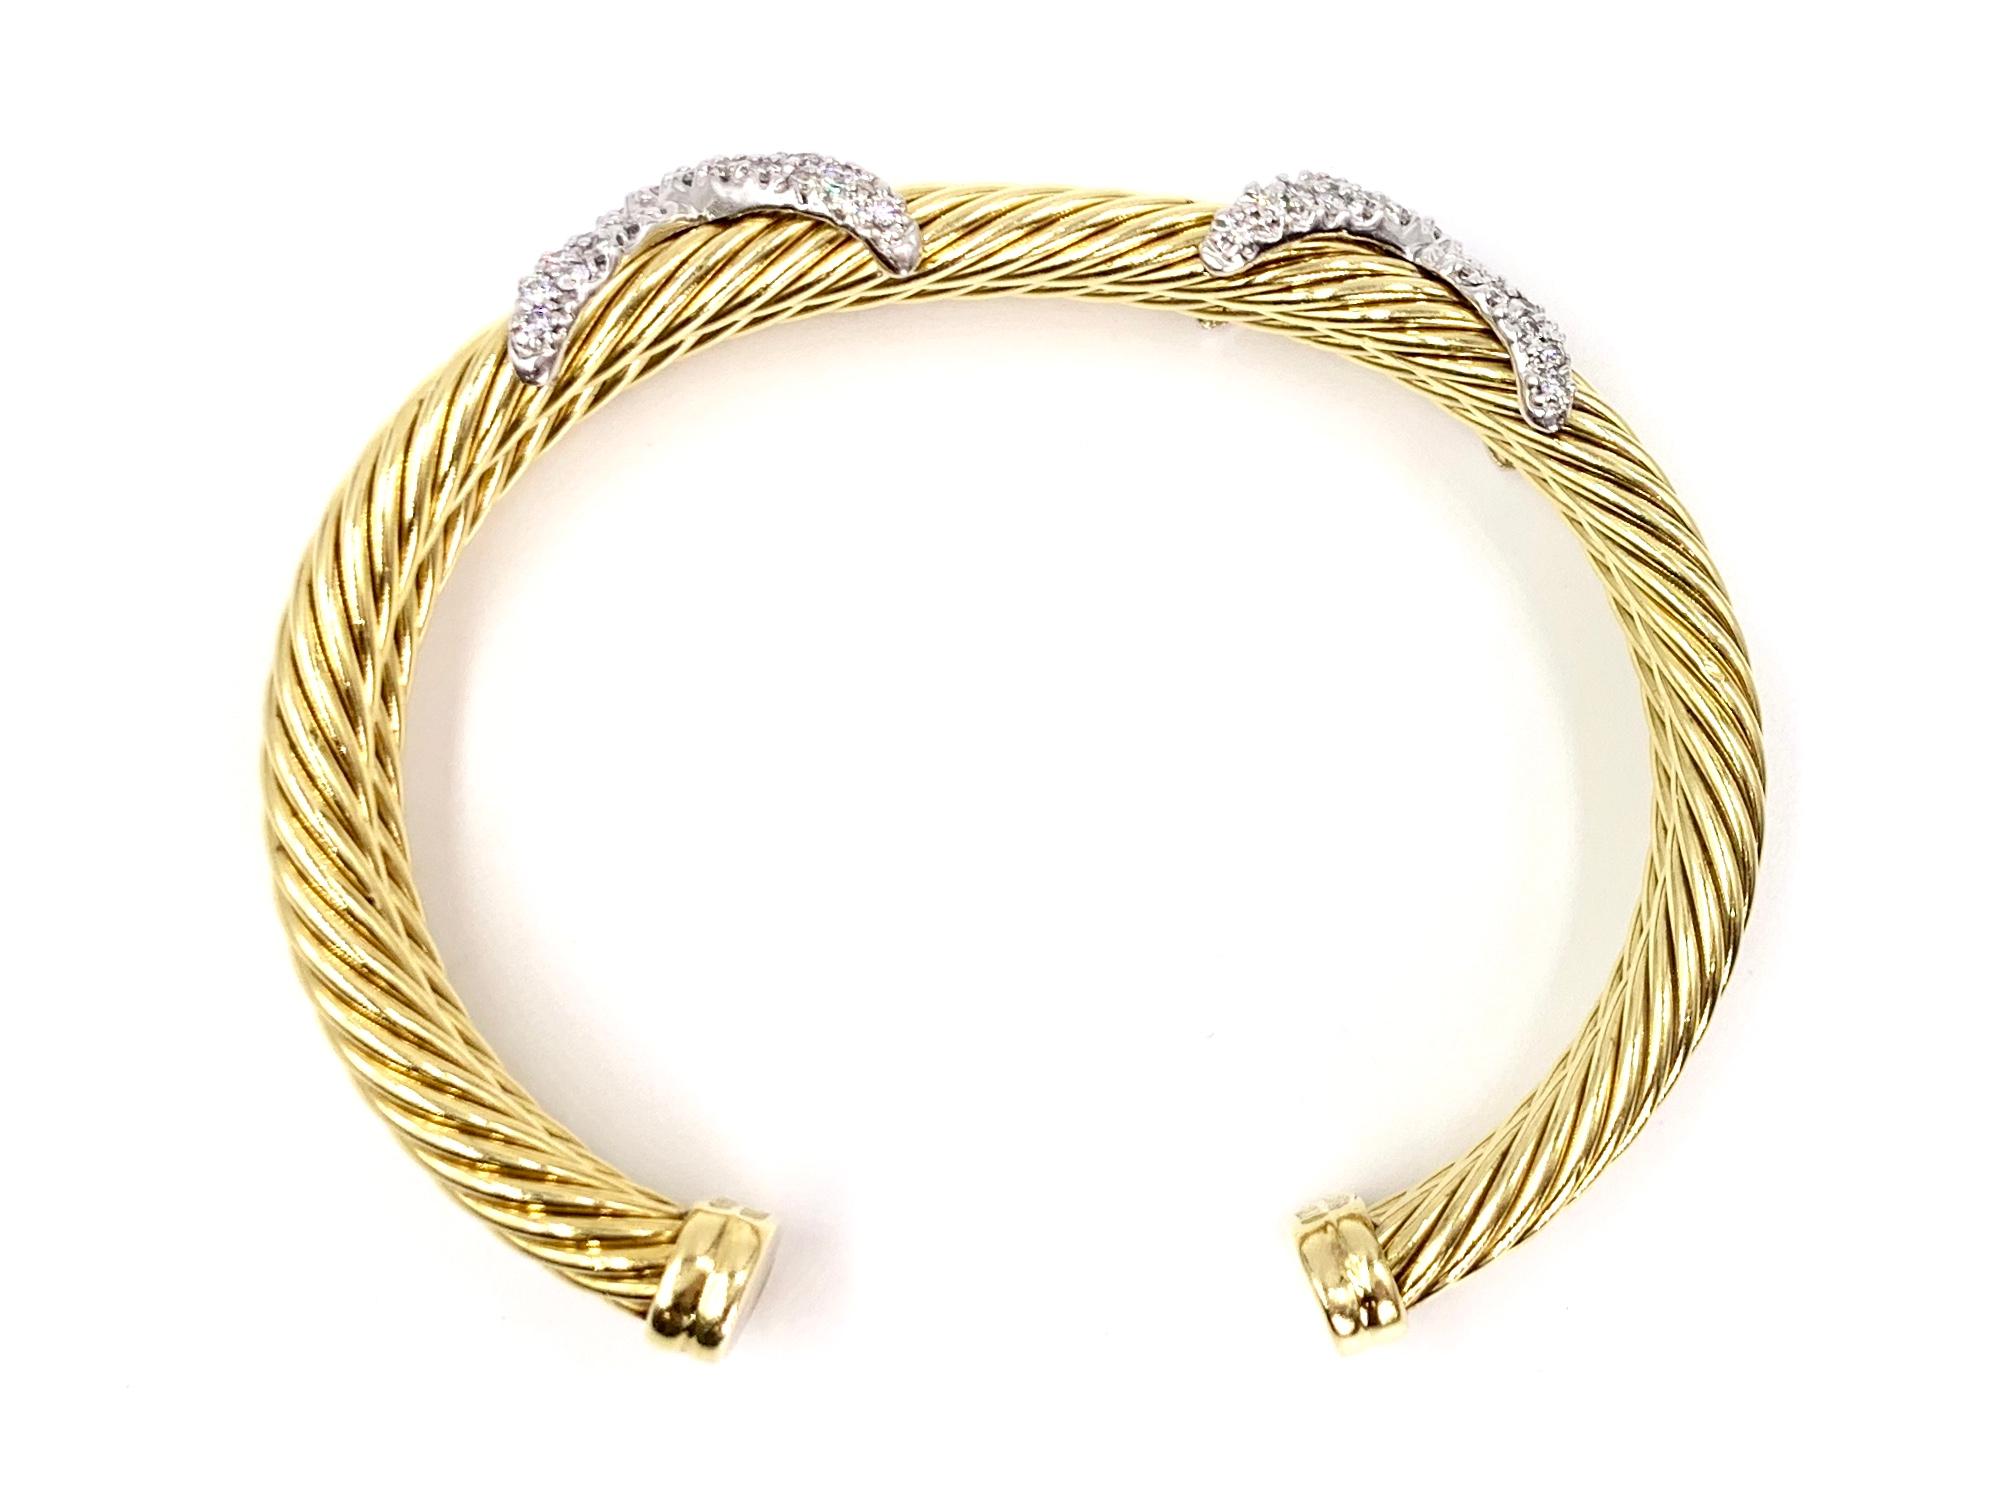 David Yurman 18 Karat Yellow Gold and Diamond Cable Cuff Bracelet In Good Condition For Sale In Pikesville, MD